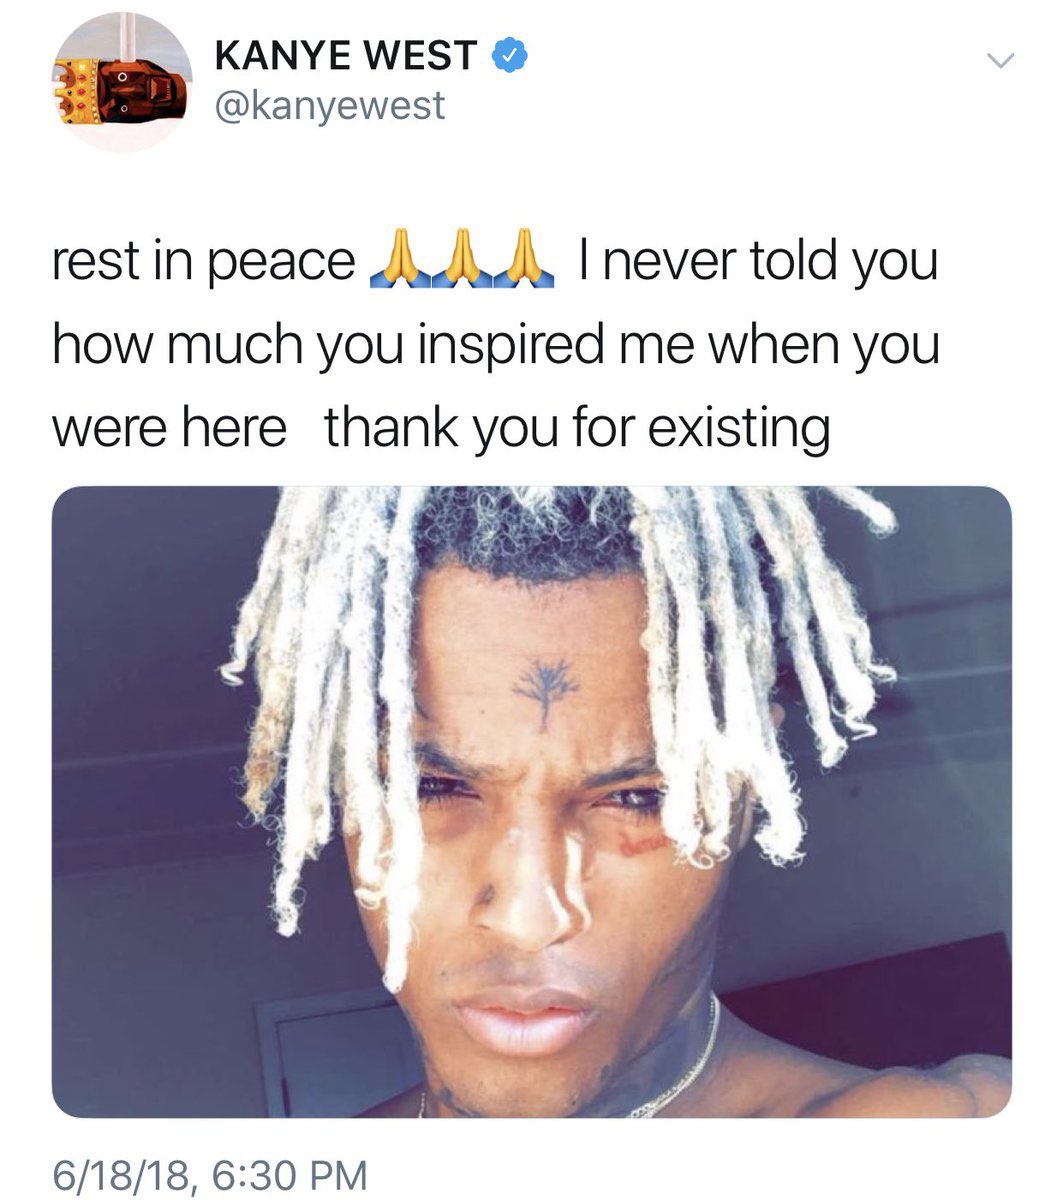 Meaning of True Love by Kanye West & XXXTENTACION